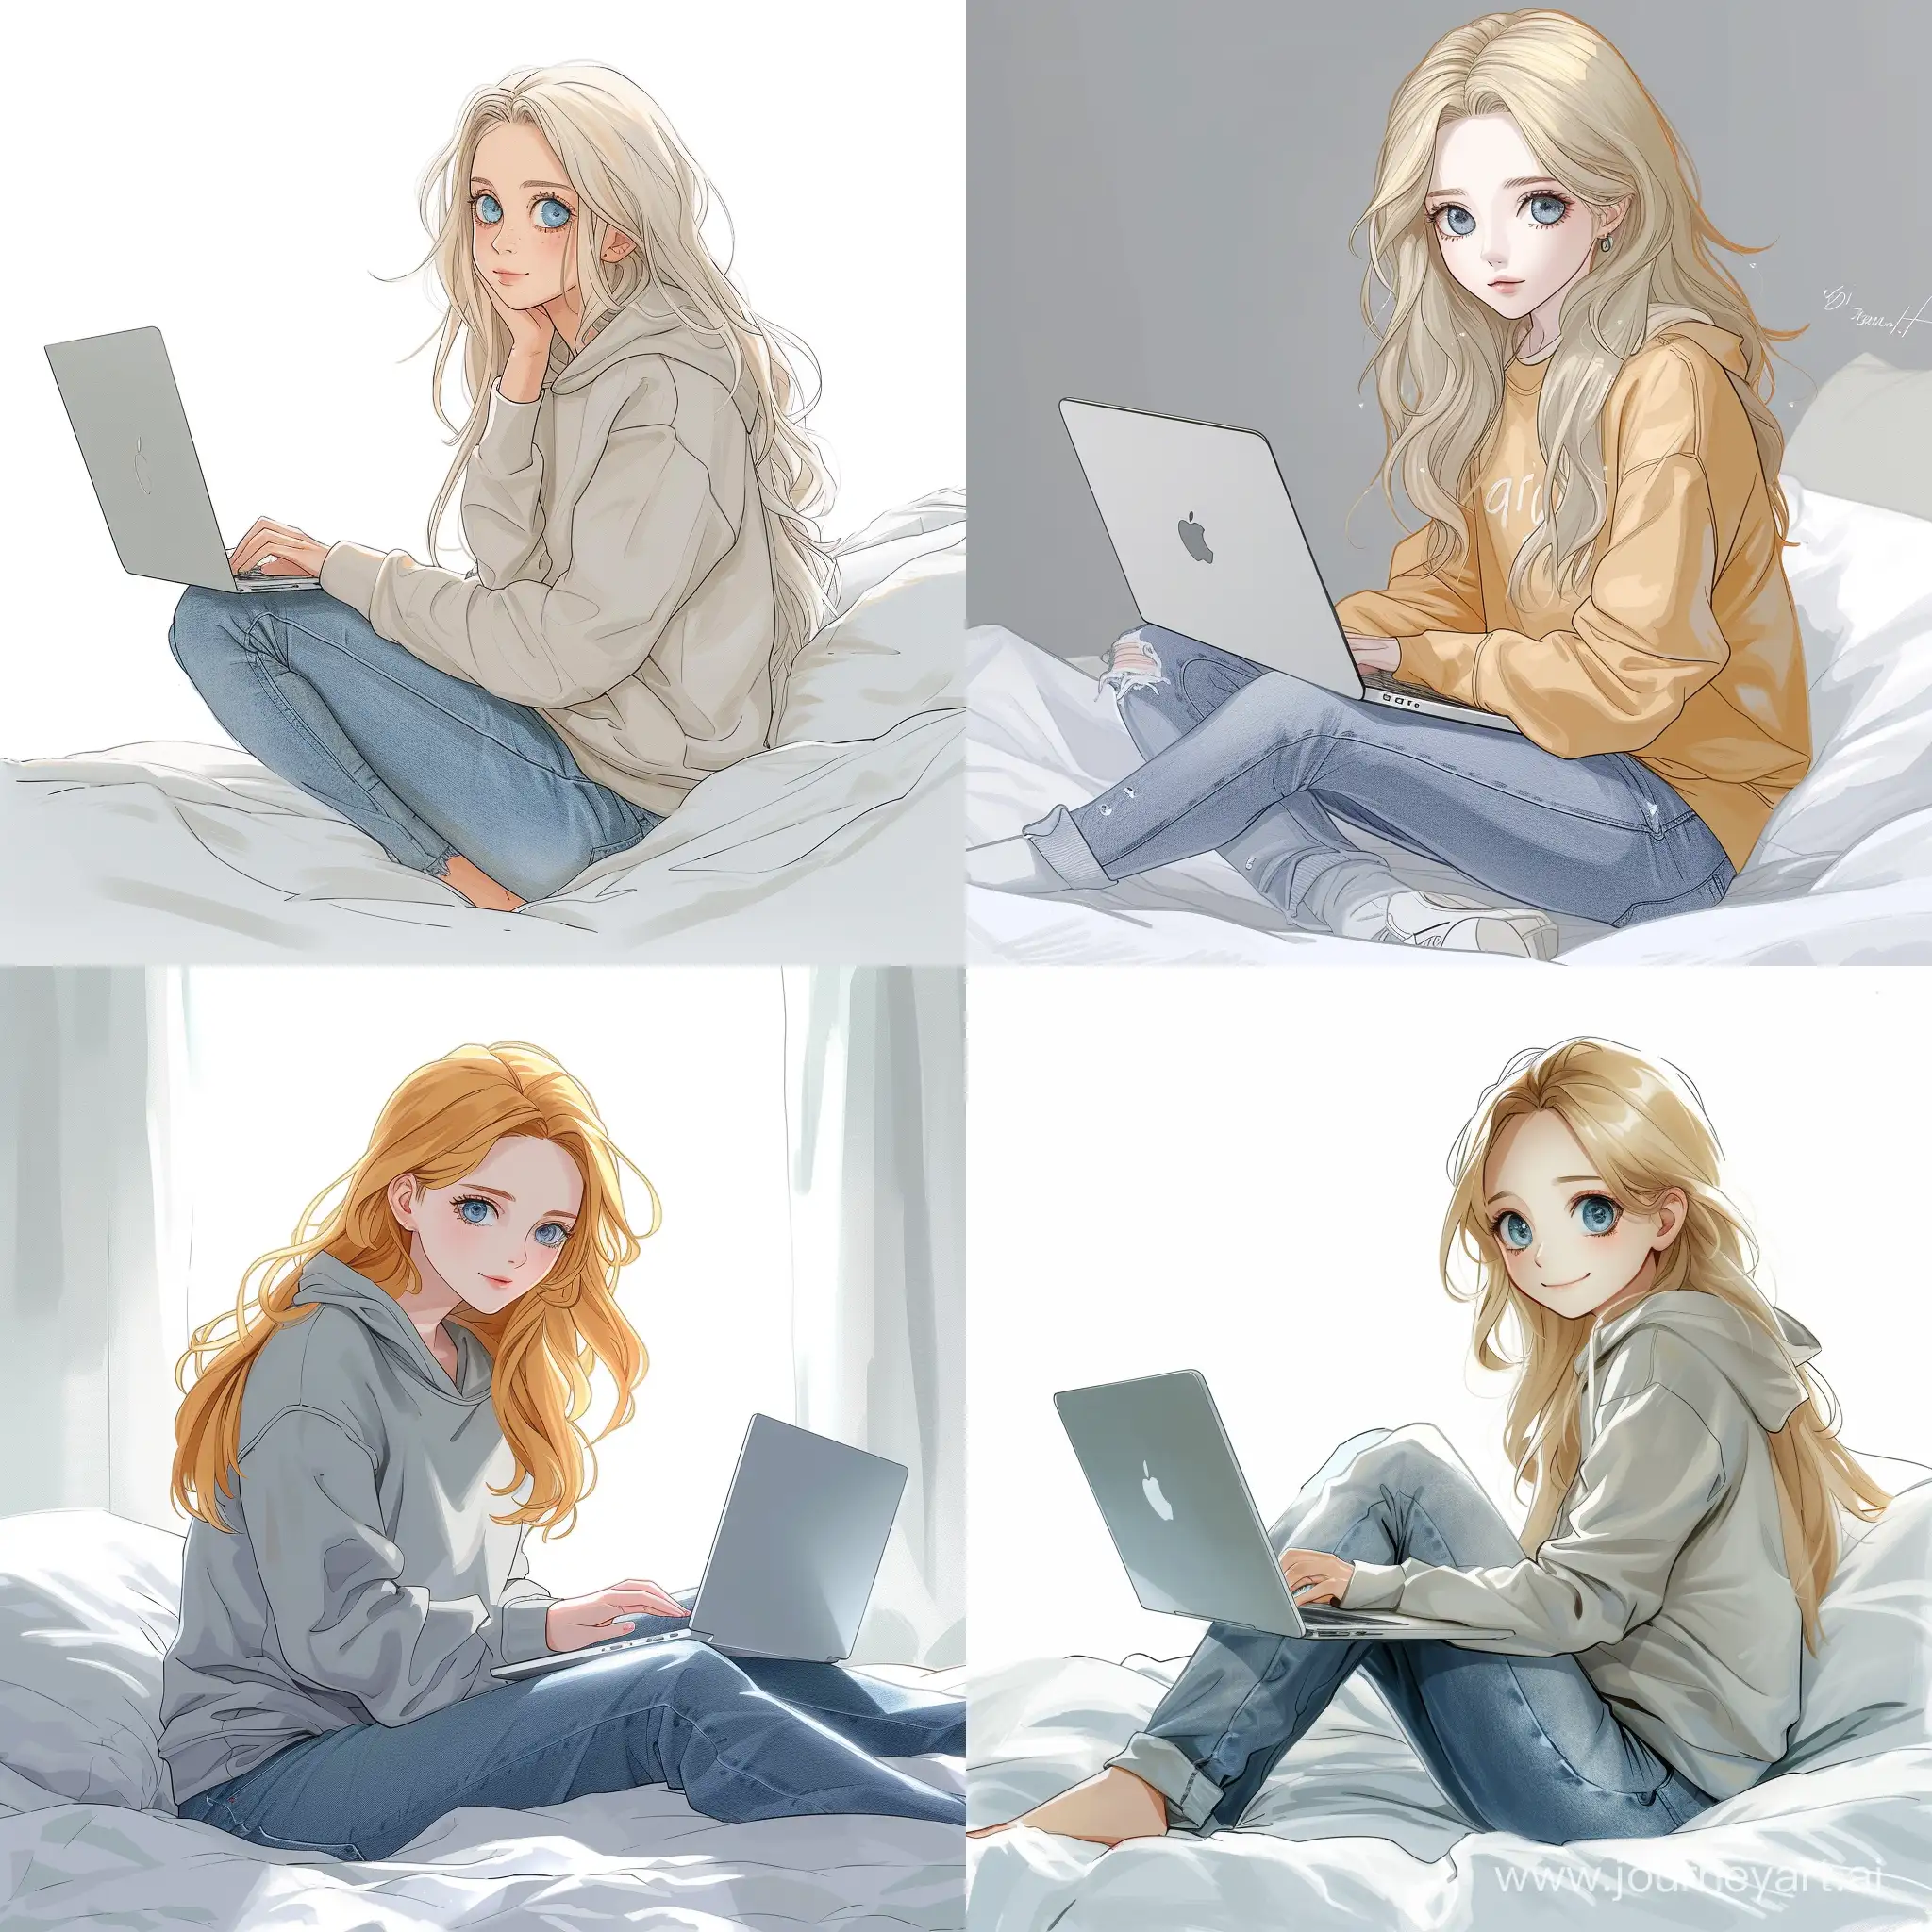 Beautiful girl, golden hair, gray-blue eyes, white skin, teenager, 15 years old, sweatshirt and jeans, sitting on the bed, laptop, high quality, high detail, cartoon art